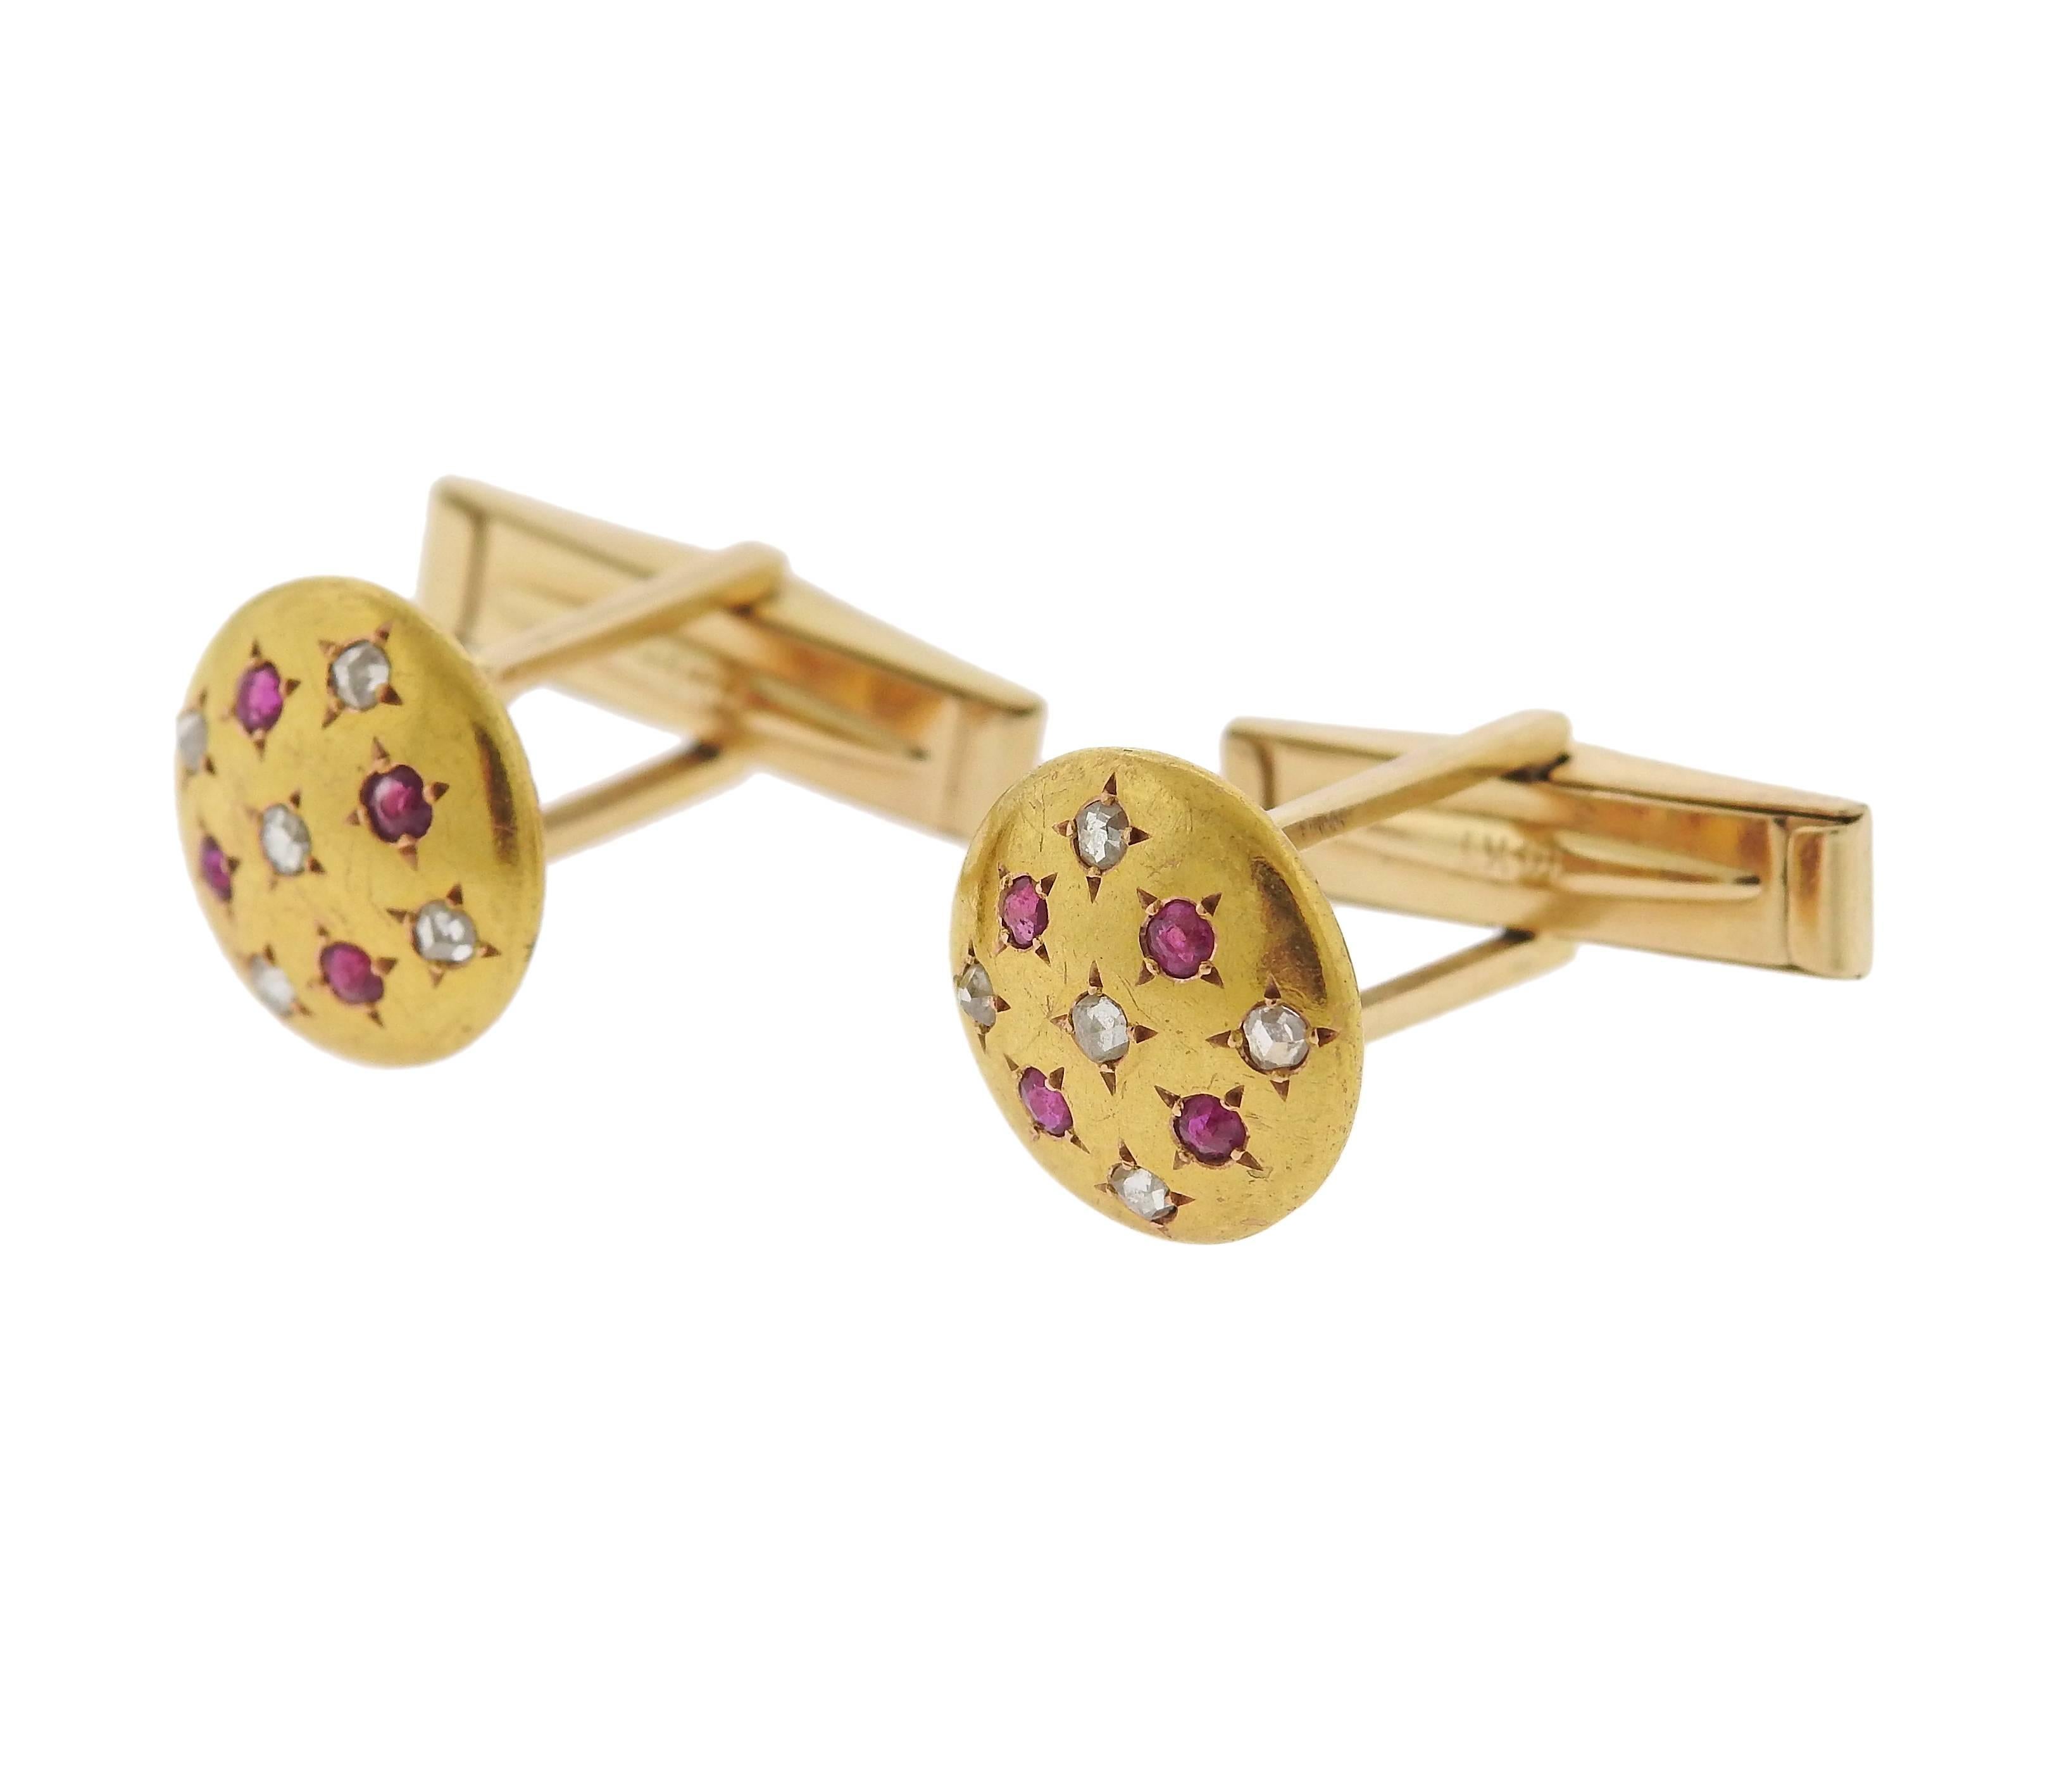 Pair of antique 18k gold cufflinks, decorated with rubies and rose cut diamonds. Cufflink top 13.3mm in diameter , weight - 8.1 grams. Top tested 18k, hardware marked 14k. 